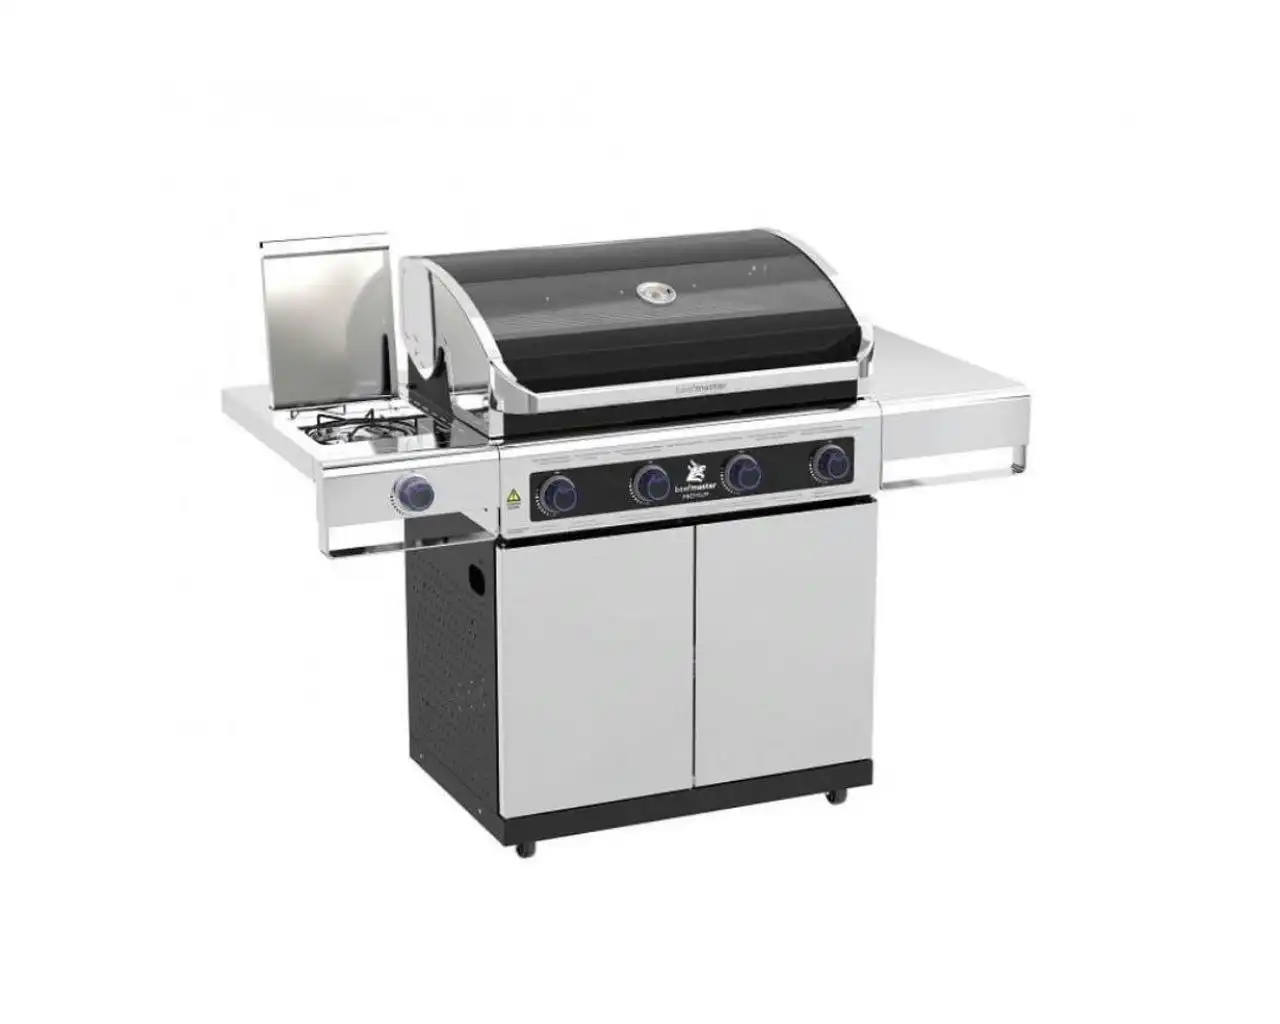 Premium Beefmaster 4 Burner BBQ on Deluxe Cart with Stainless Steel Side Burner